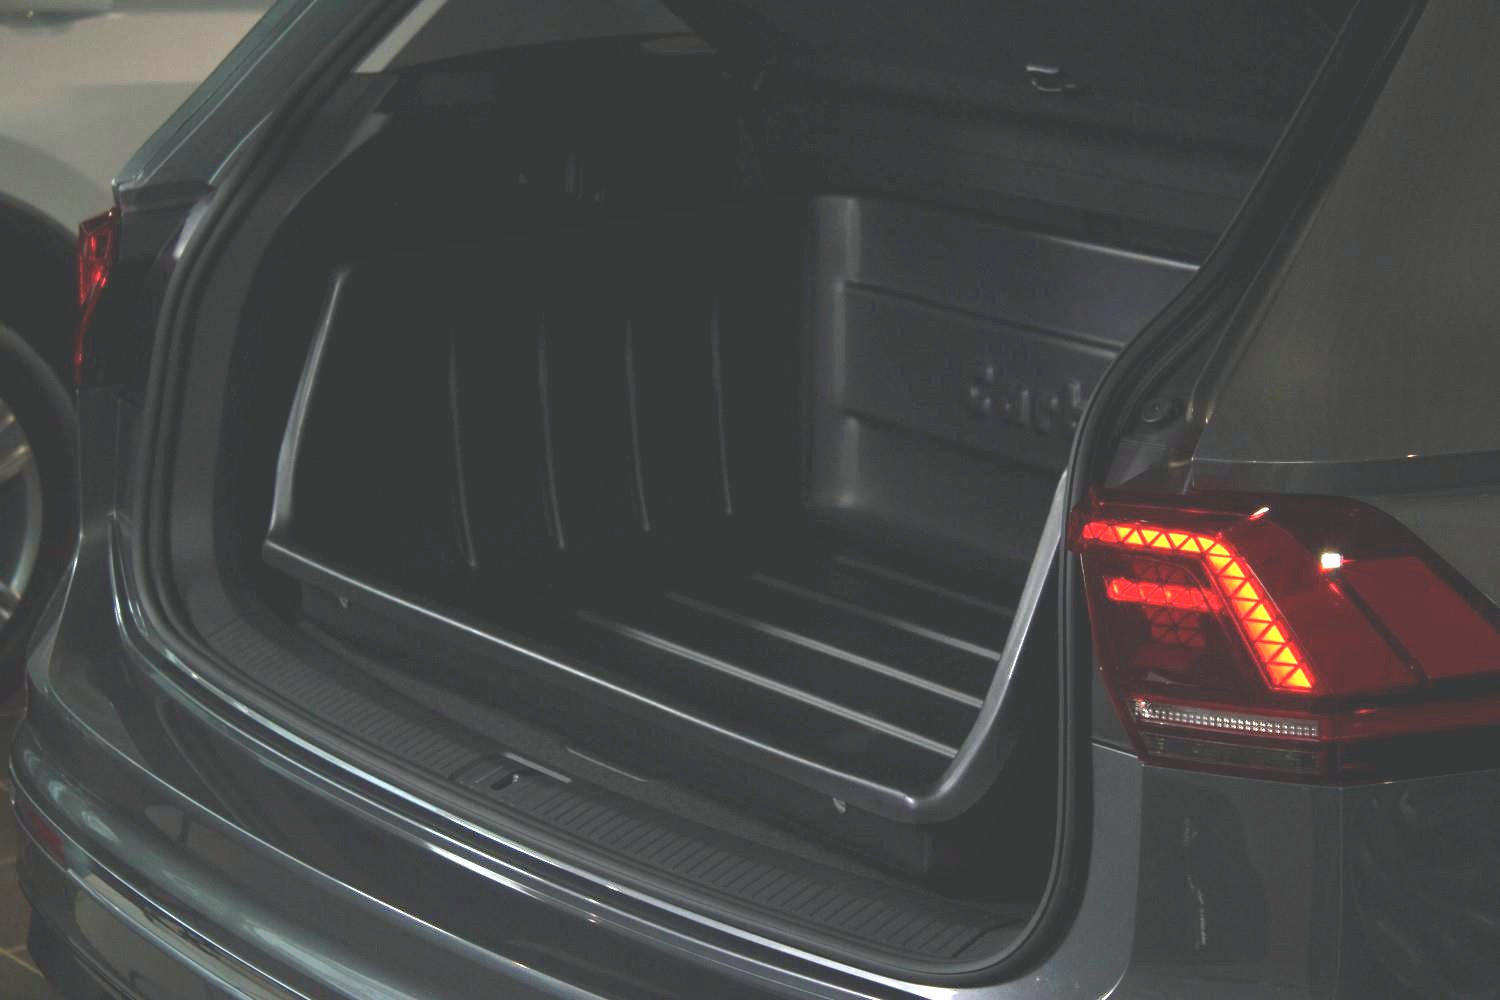 Boot liner Carbox Classic YourSize